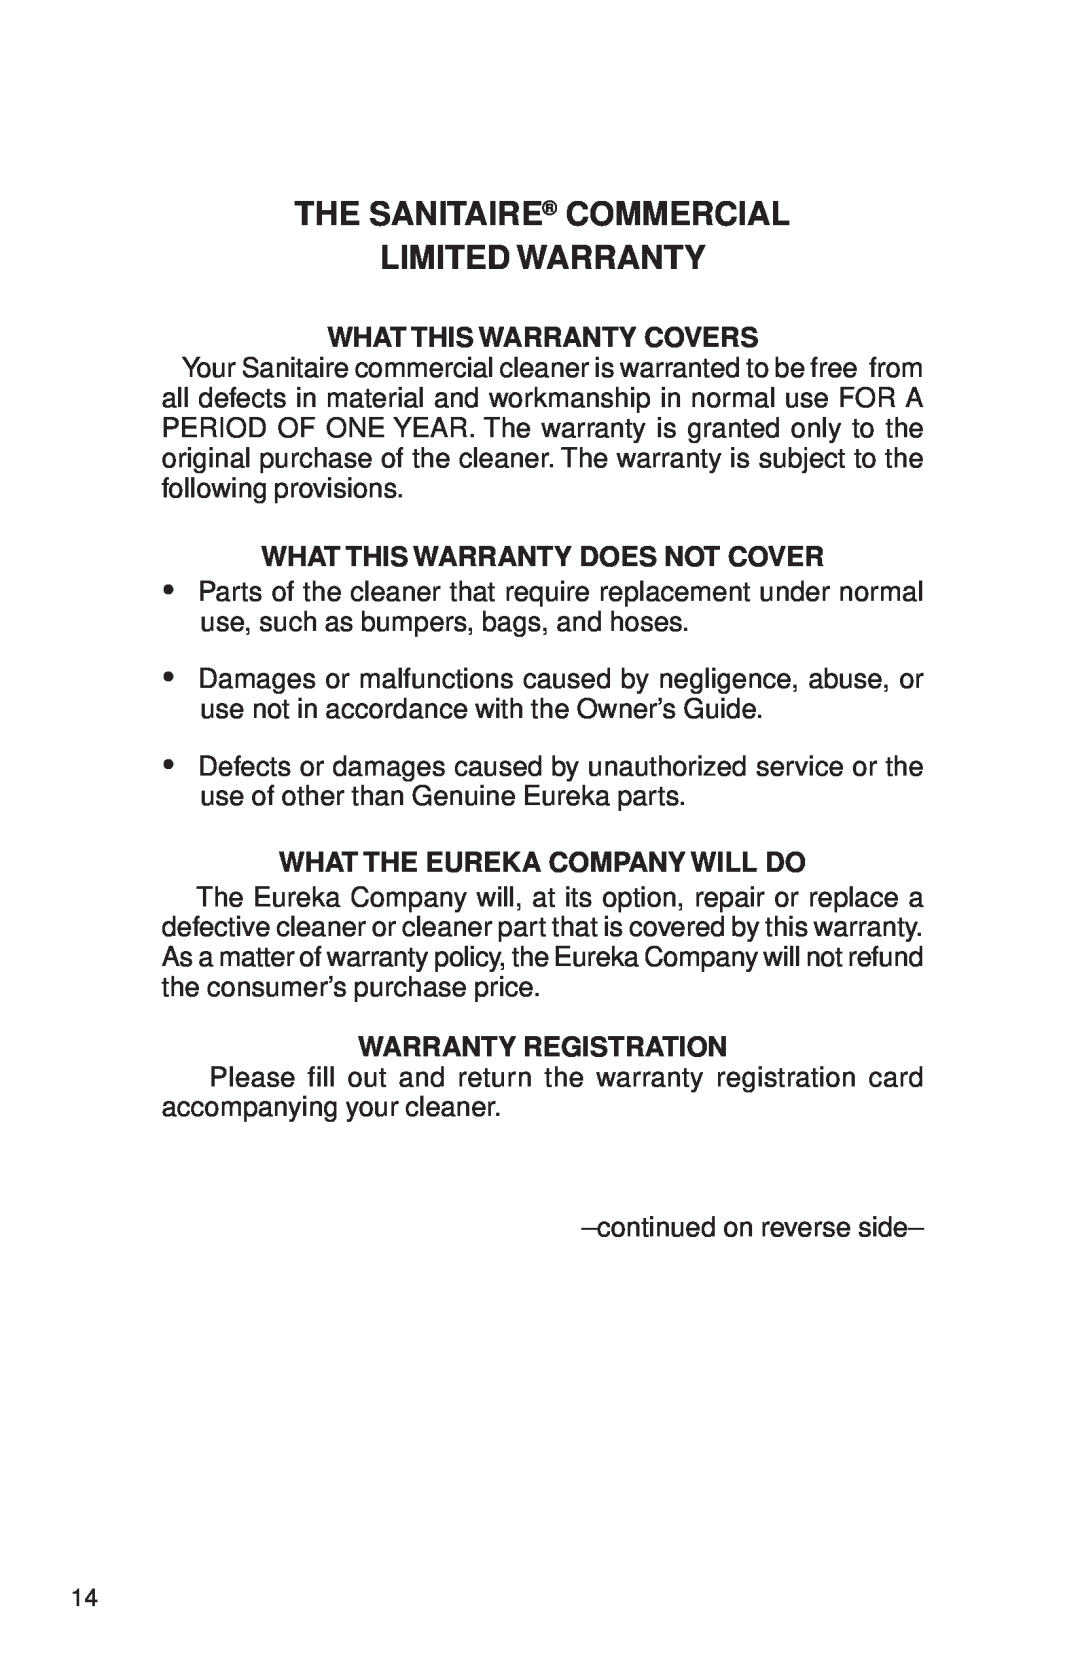 Sanitaire SC3680 Series The Sanitaire Commercial Limited Warranty, What This Warranty Covers, Warranty Registration 